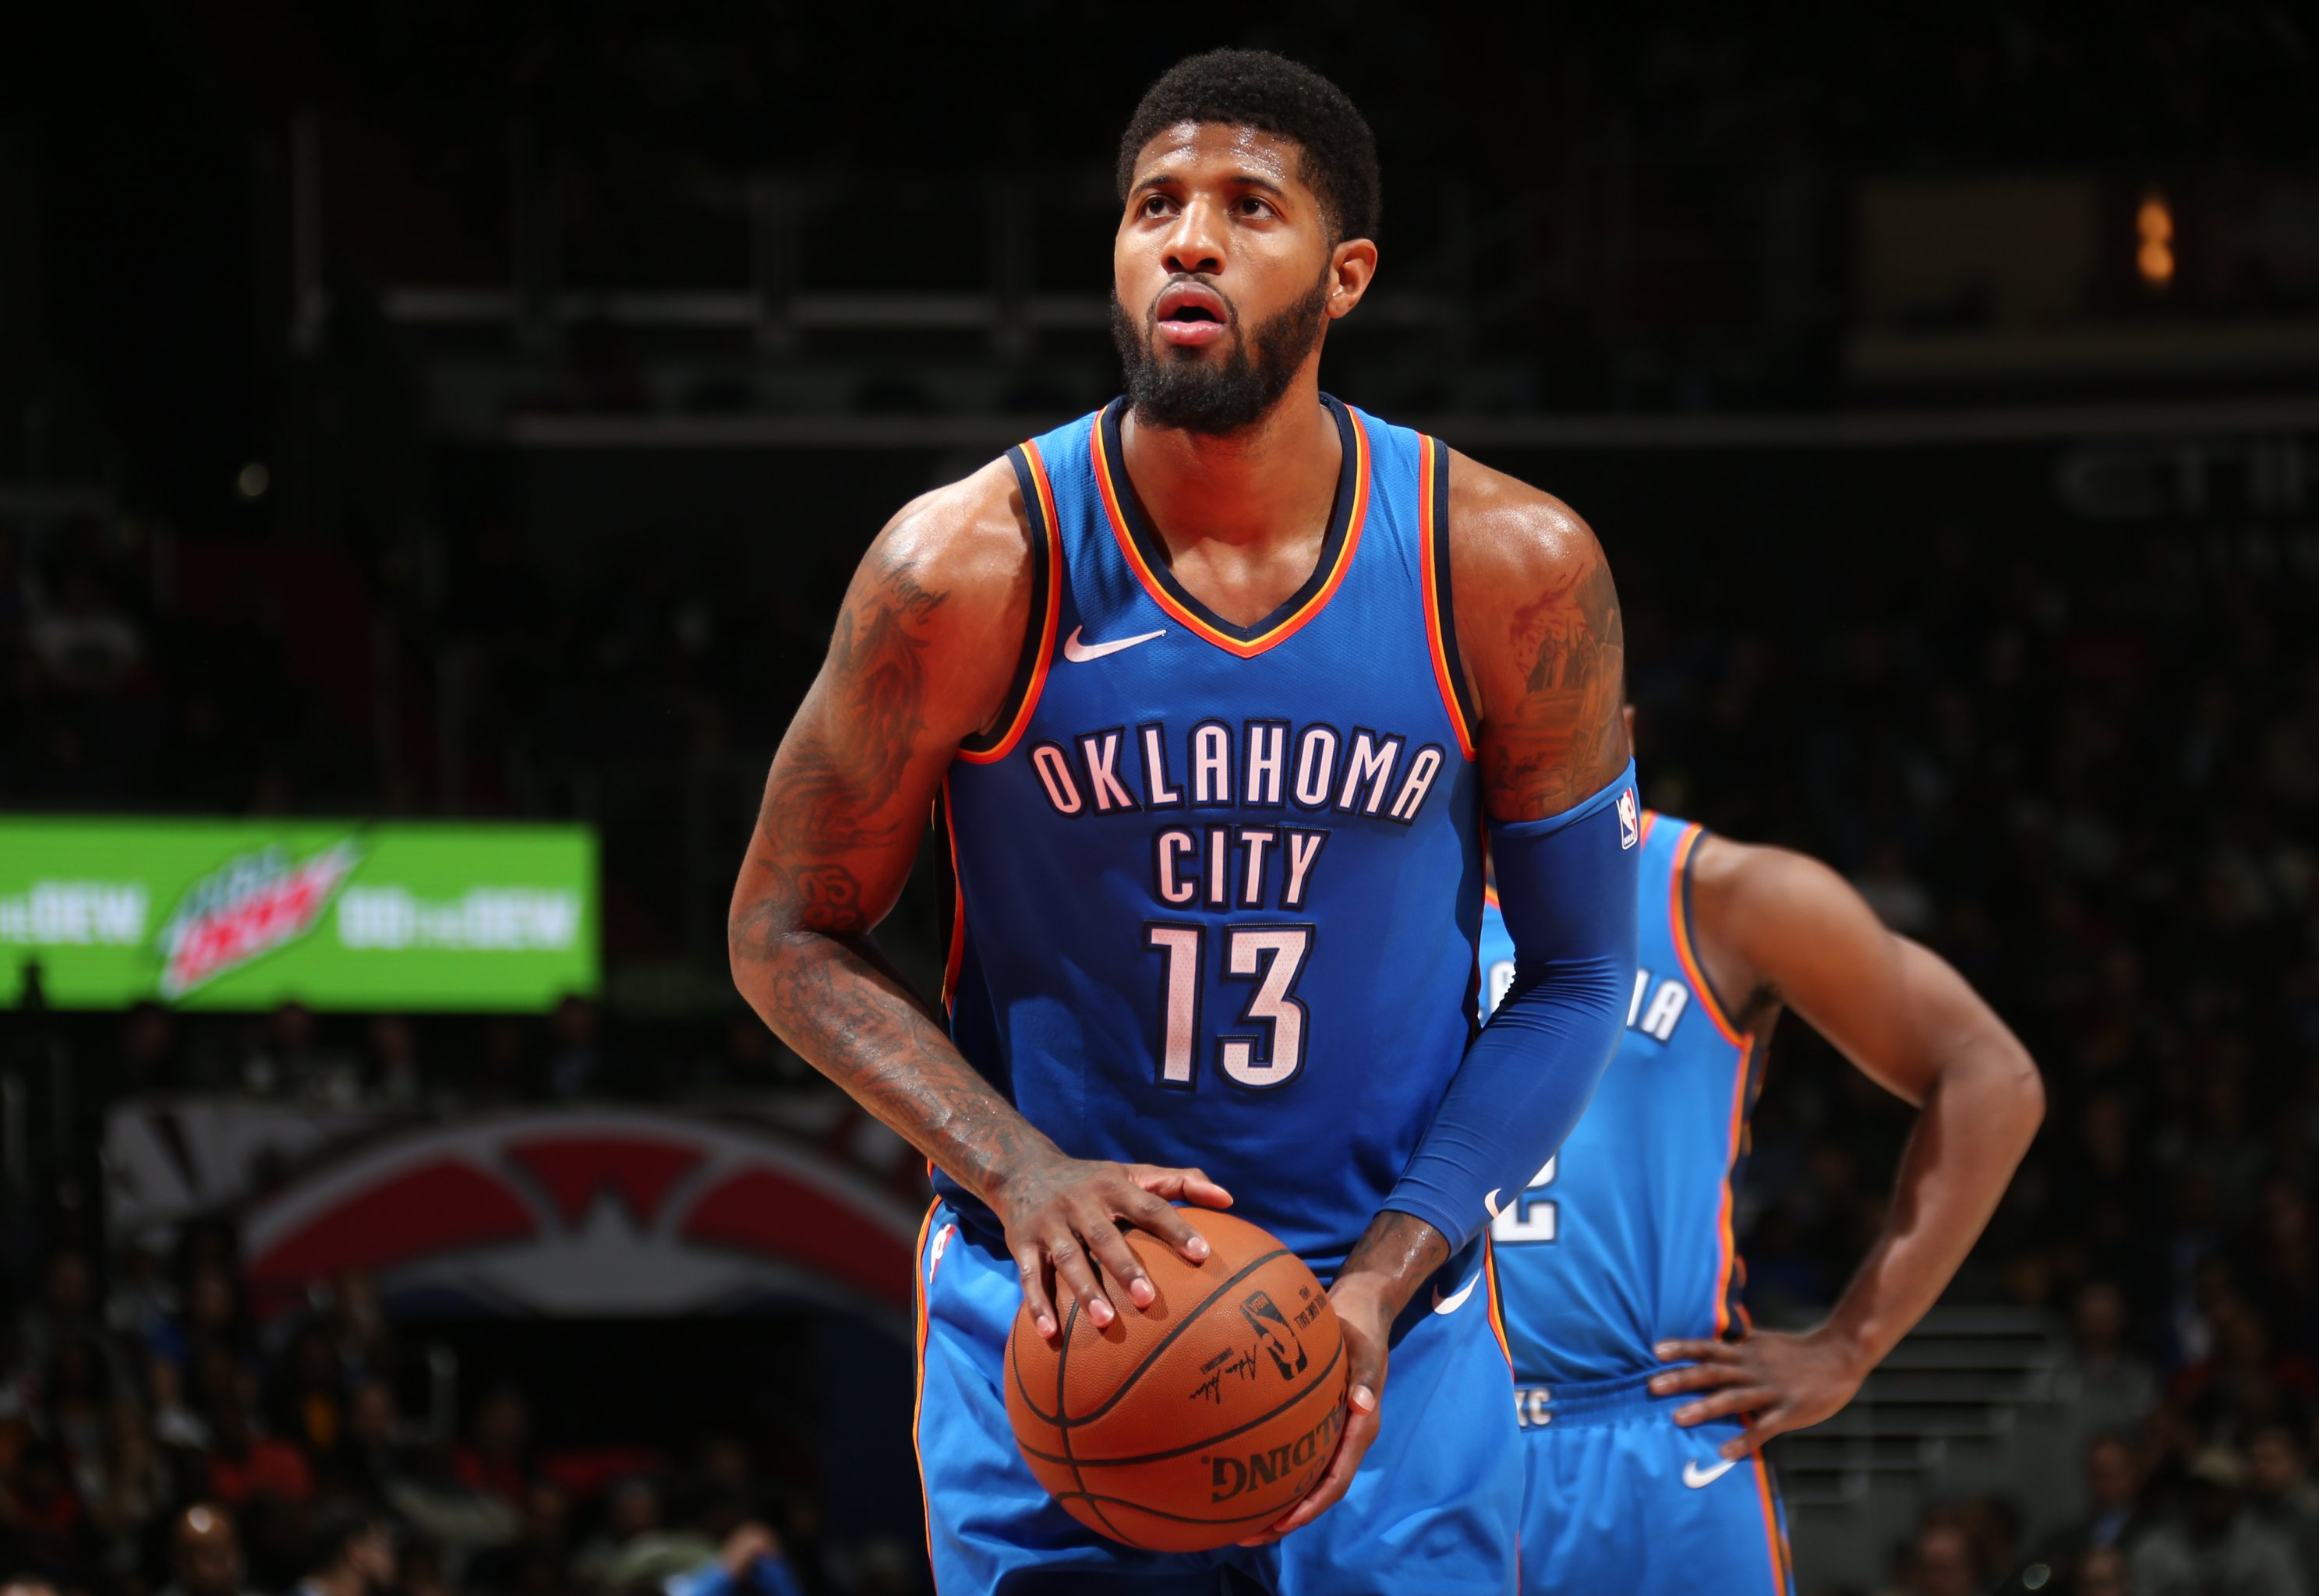 Paul George explodes for 43 points in OKC Thunder's 118-102 win